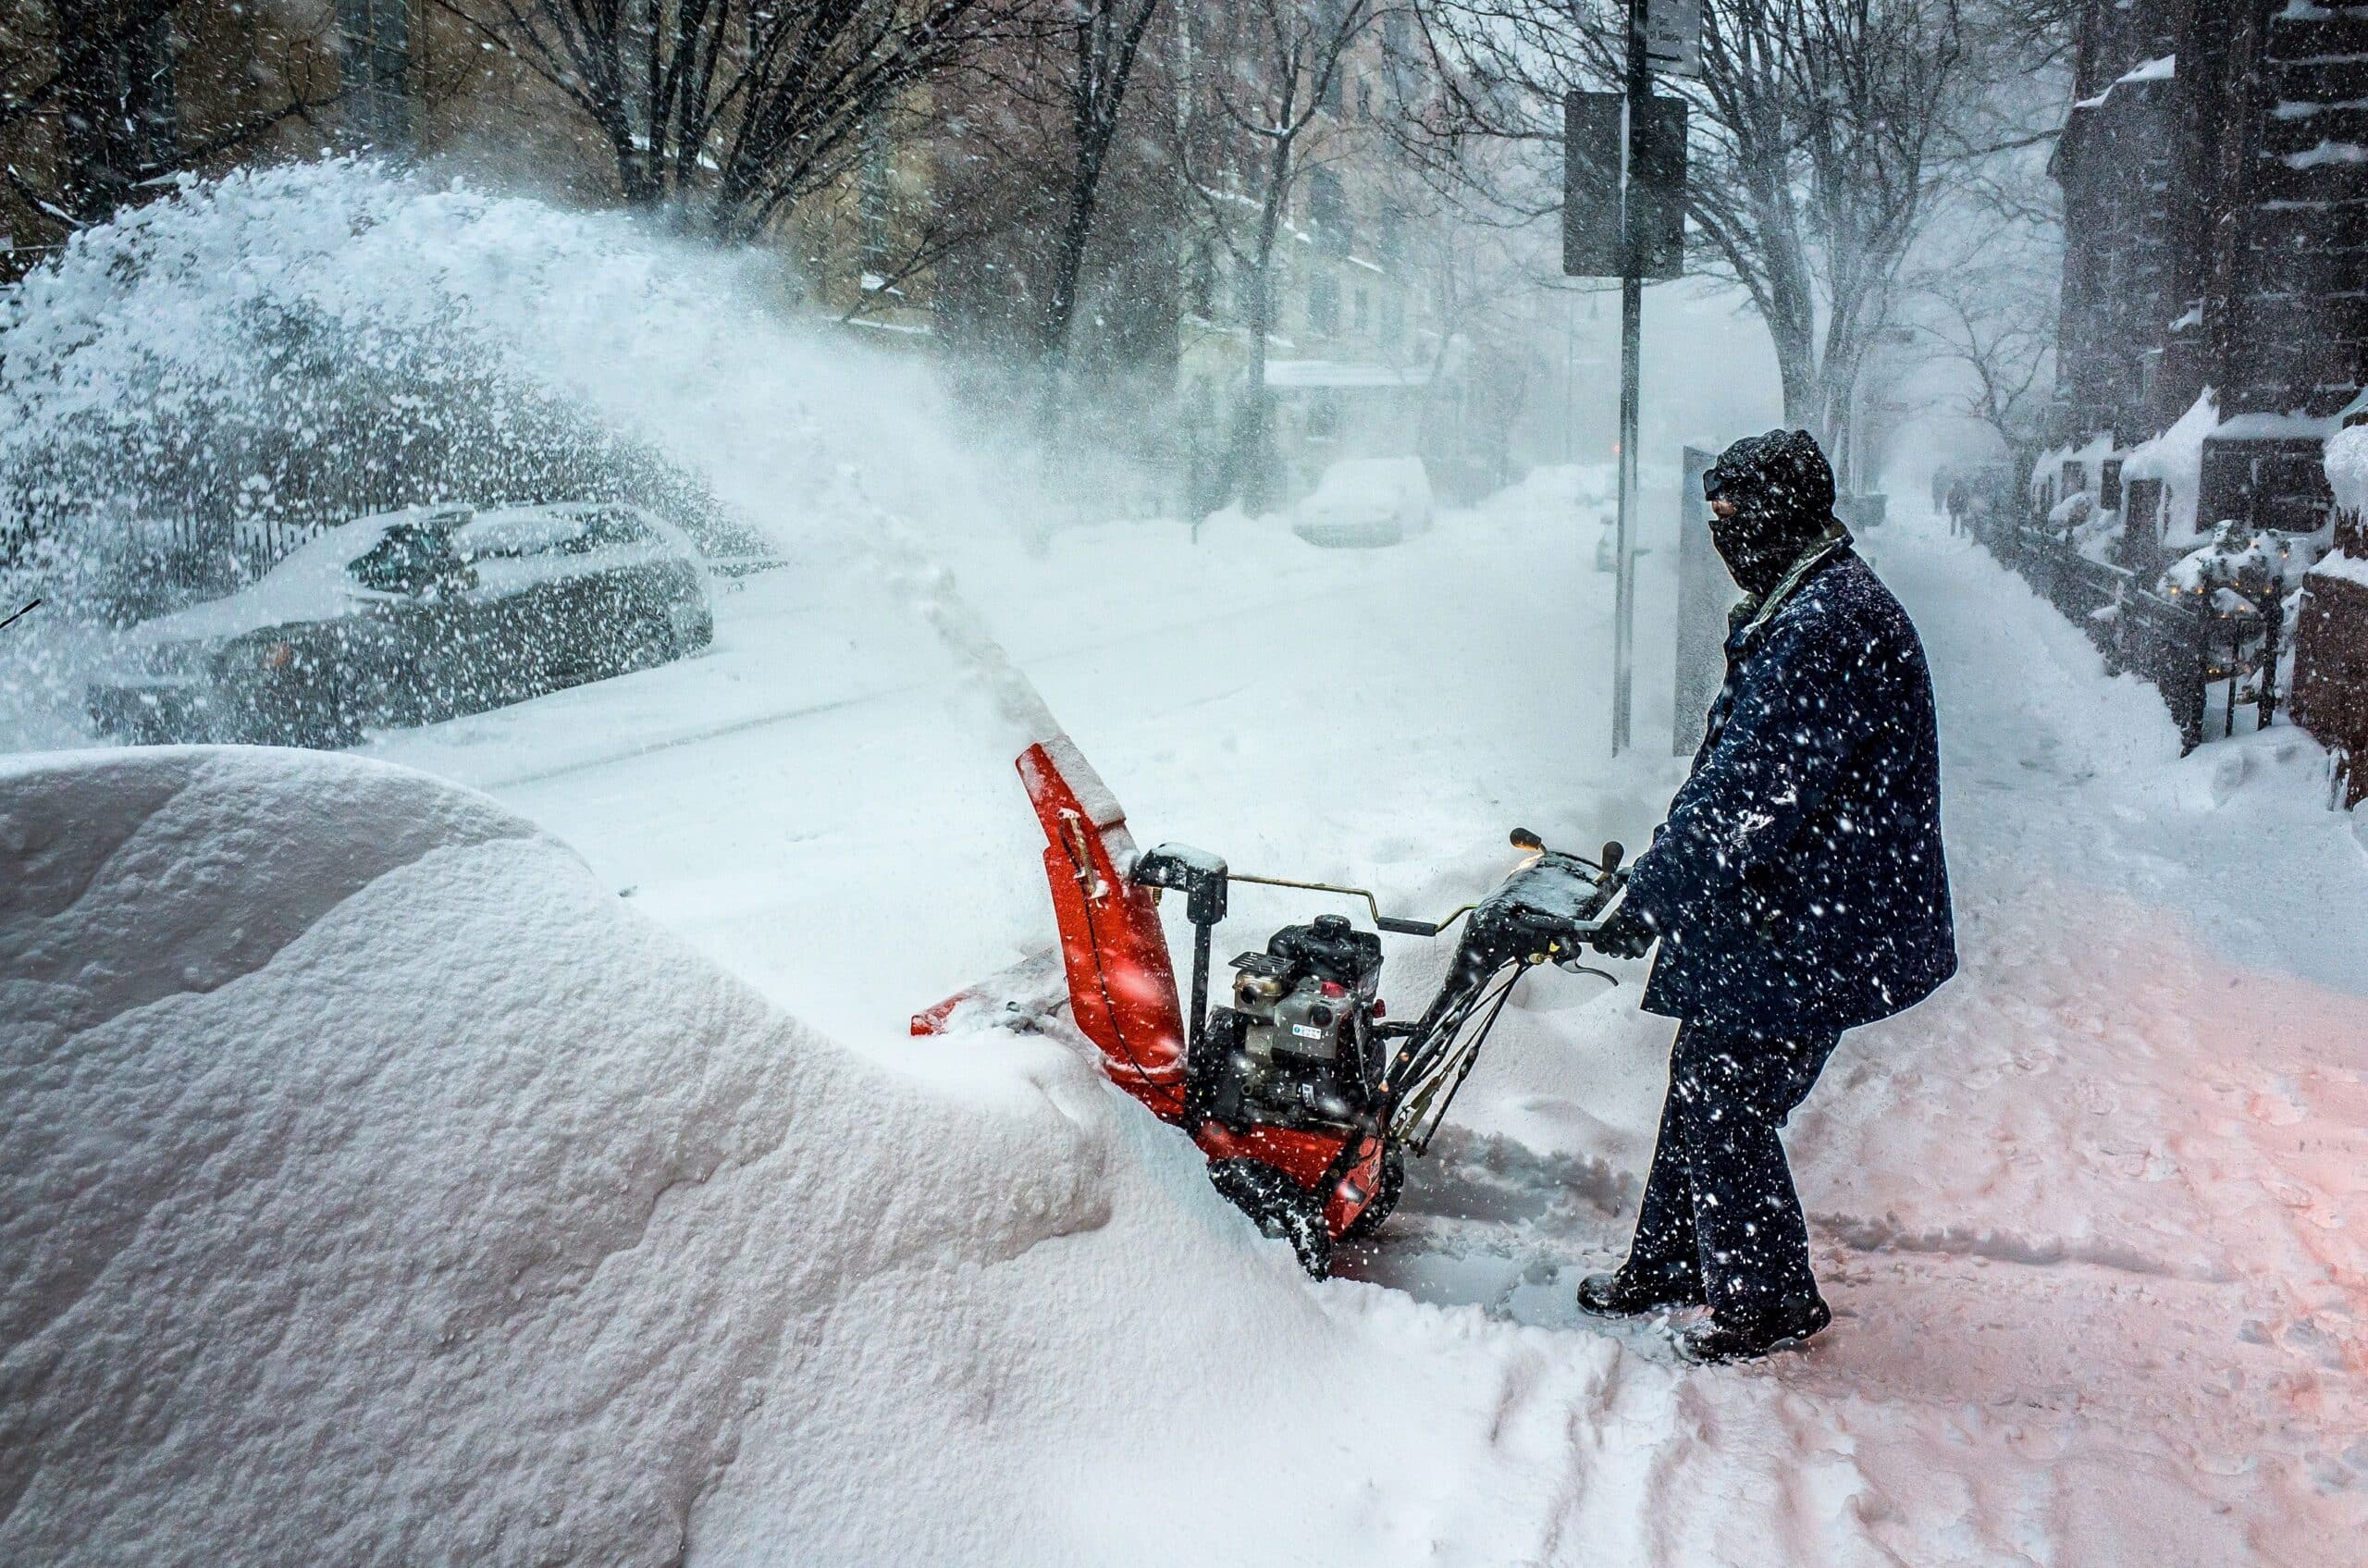 Snow blower in a snow storm